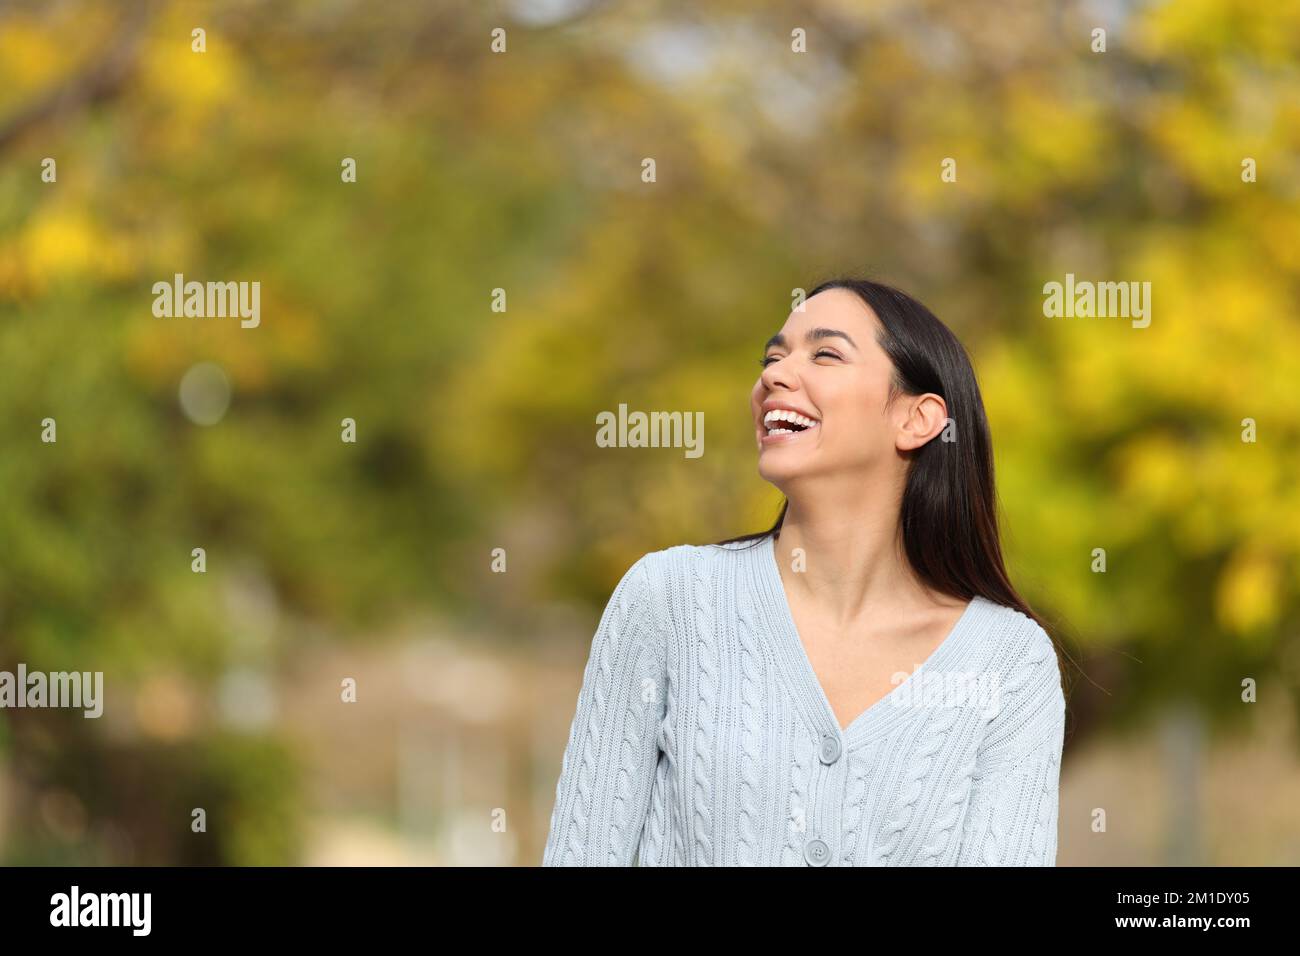 Happy woman walking in a park laughing looking at side a sunny day Stock Photo